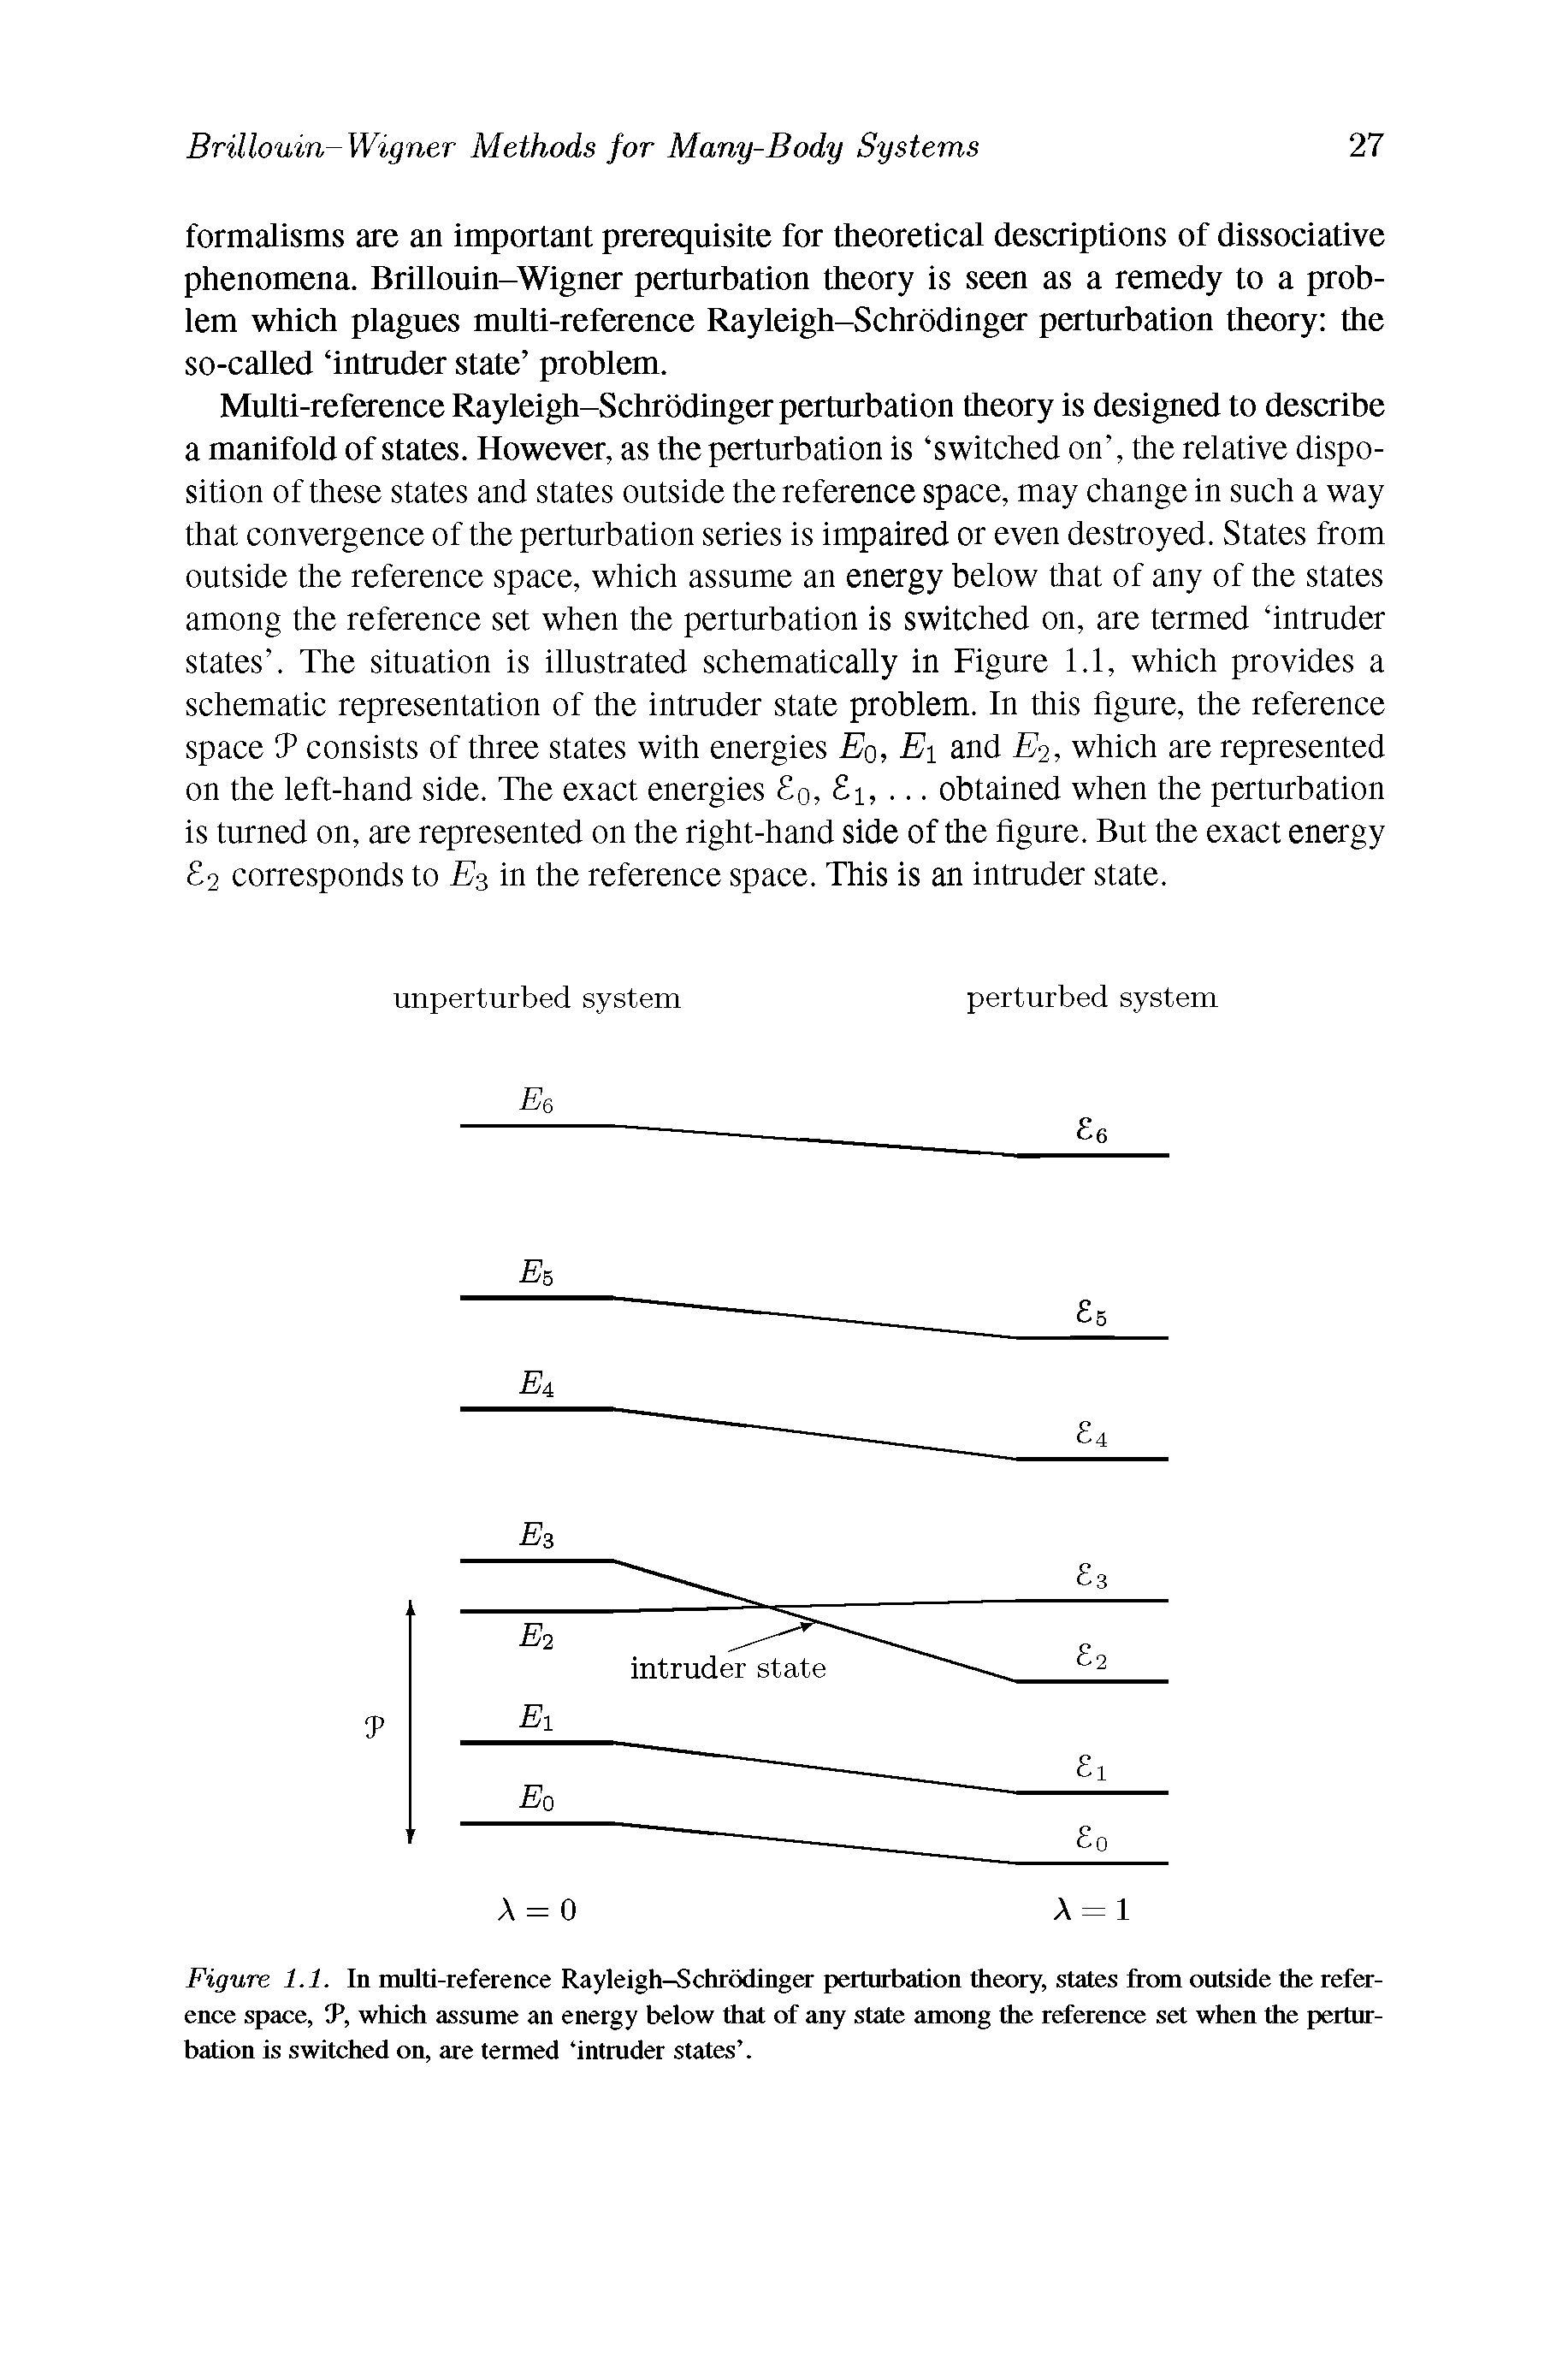 Figure 1.1. In multi-reference Rayleigh-Schrodinga- perturbation theory, states from outside the refe-ence space, P, which assume an energy below that of any state among the reference set when the perturbation is switched on, are termed intruder states .